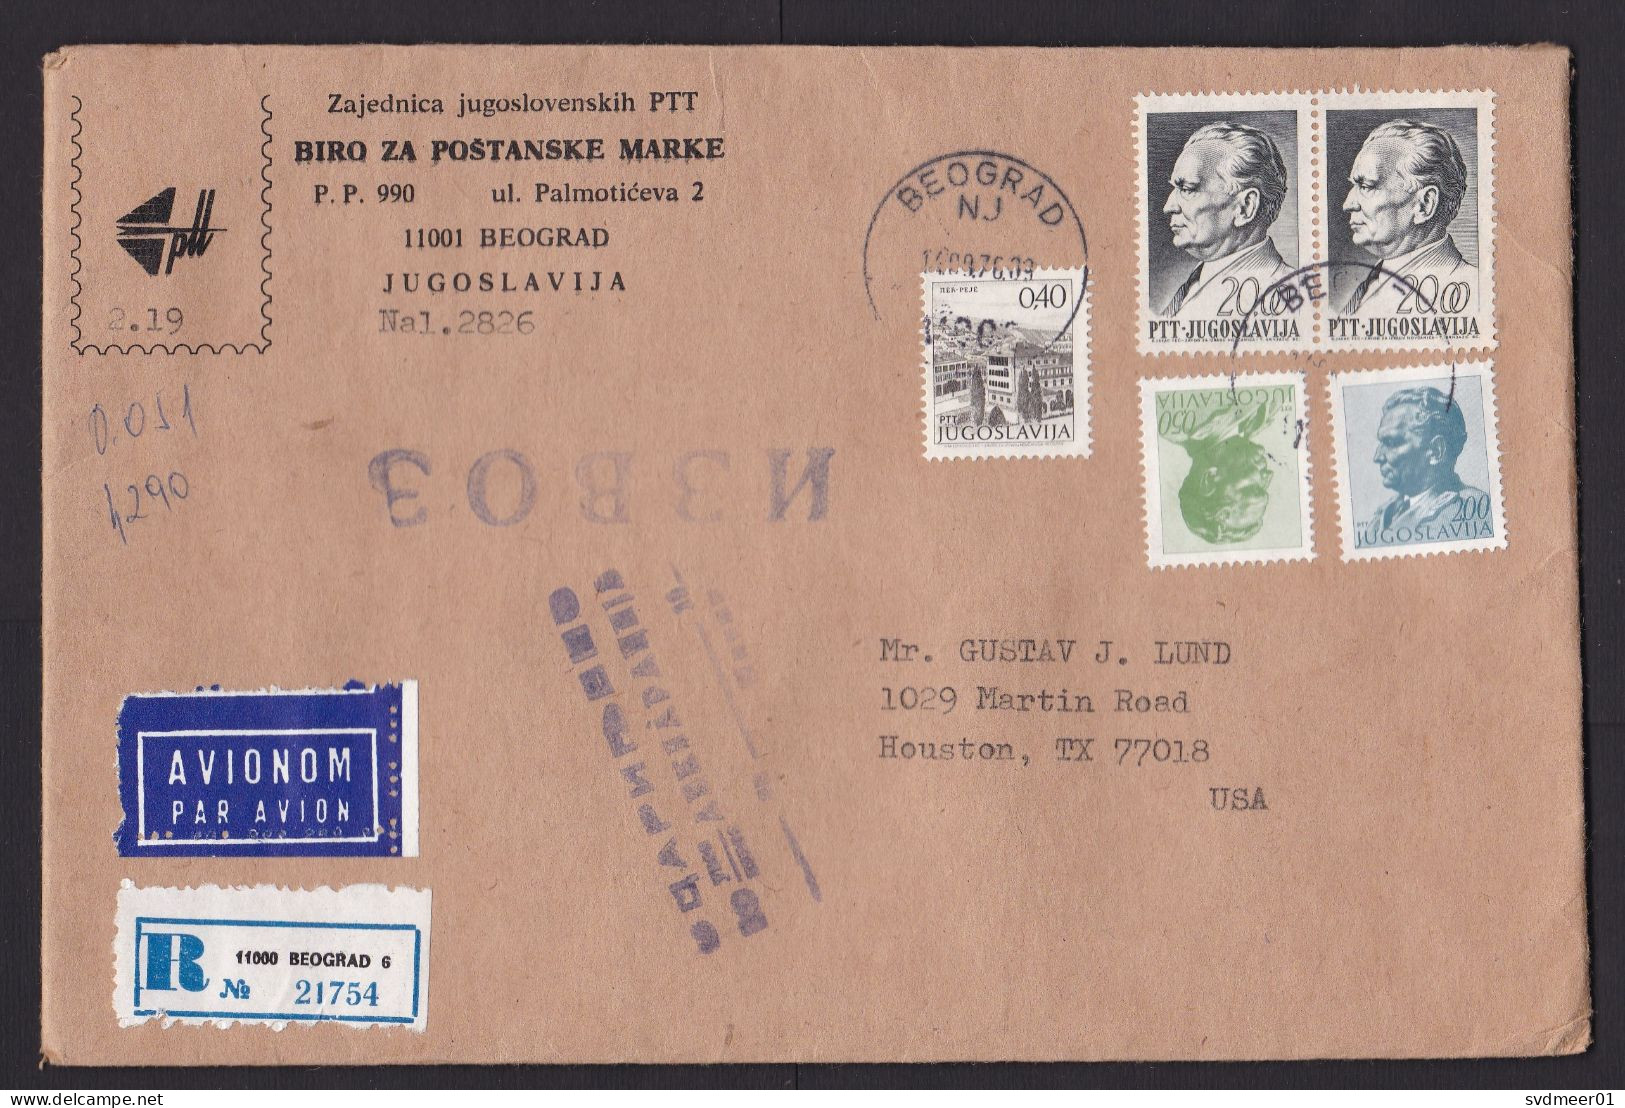 Yugoslavia: Registered Cover To USA, 1976, 5 Stamps, Tito, R-label, Cancel Customs Control? (minor Damage At Back) - Covers & Documents